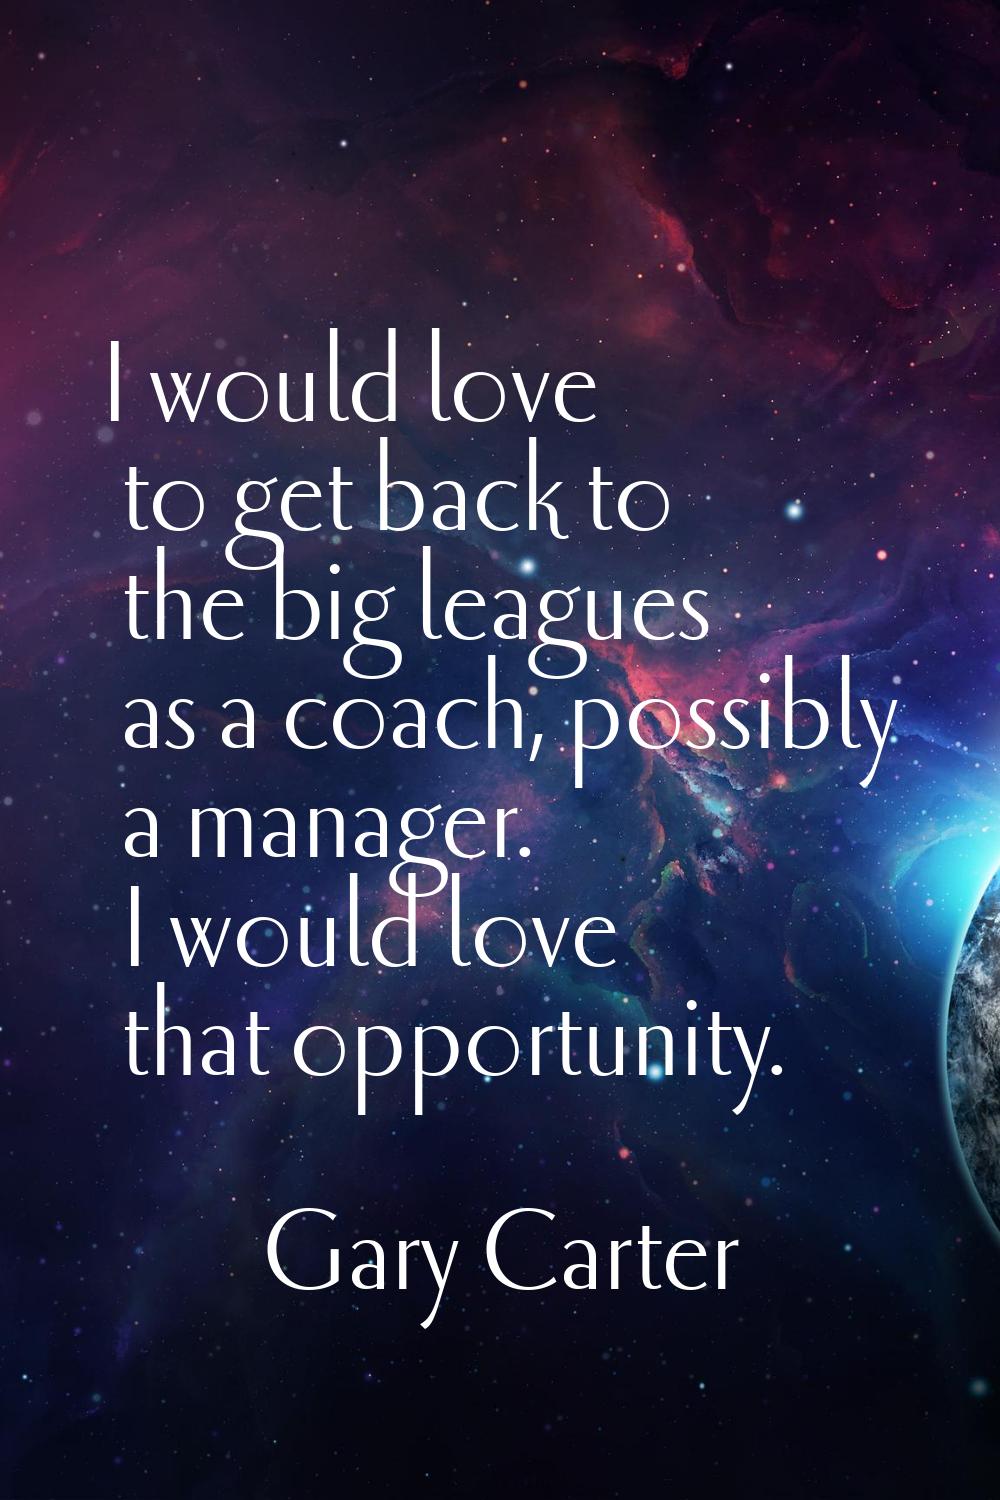 I would love to get back to the big leagues as a coach, possibly a manager. I would love that oppor